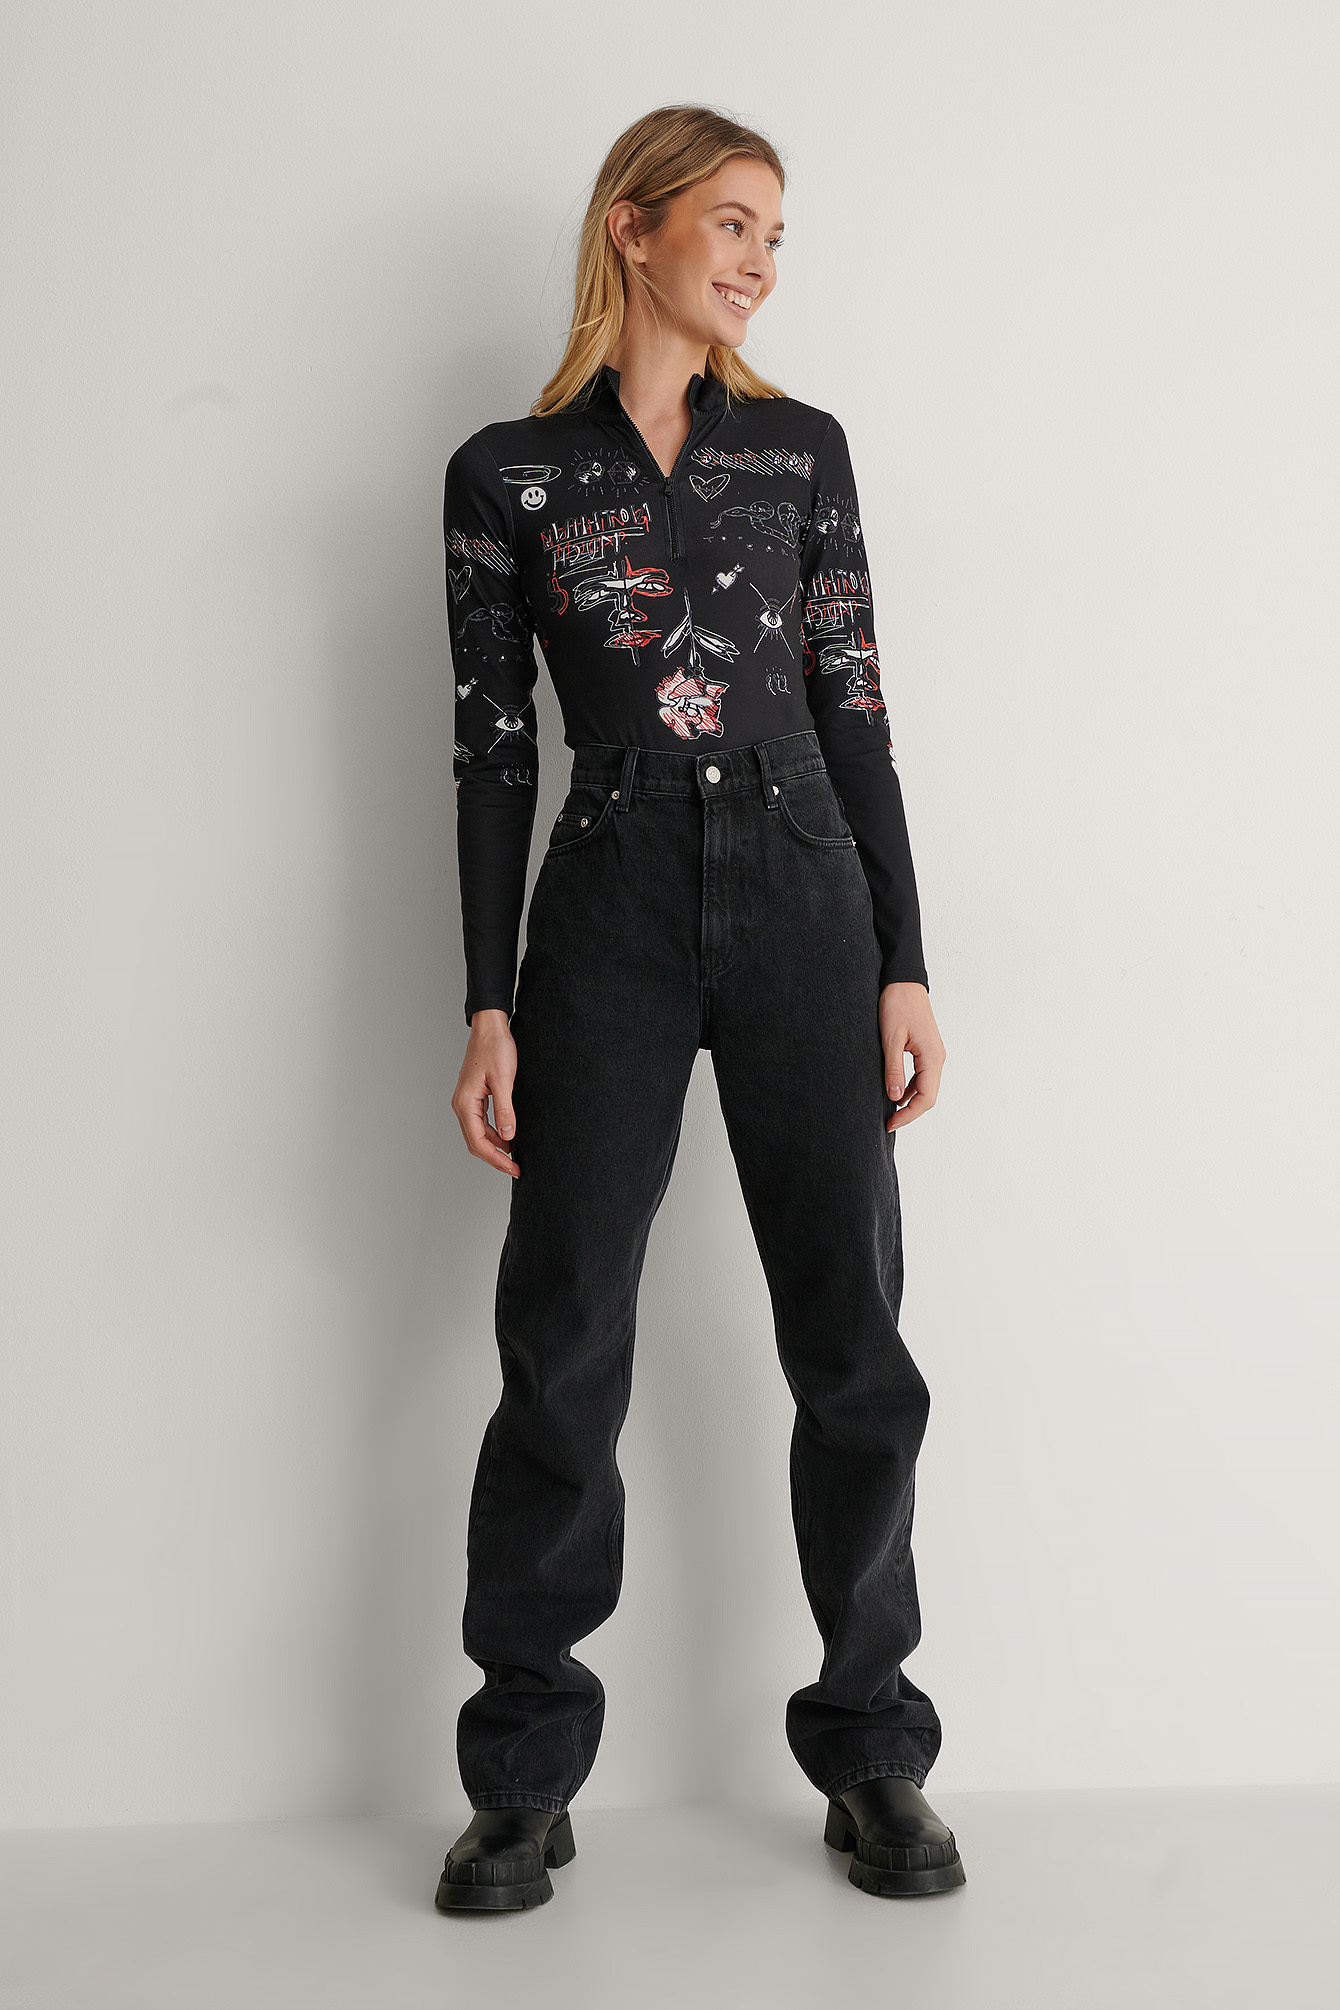 Front Zip Printed Bodysuit Outfit